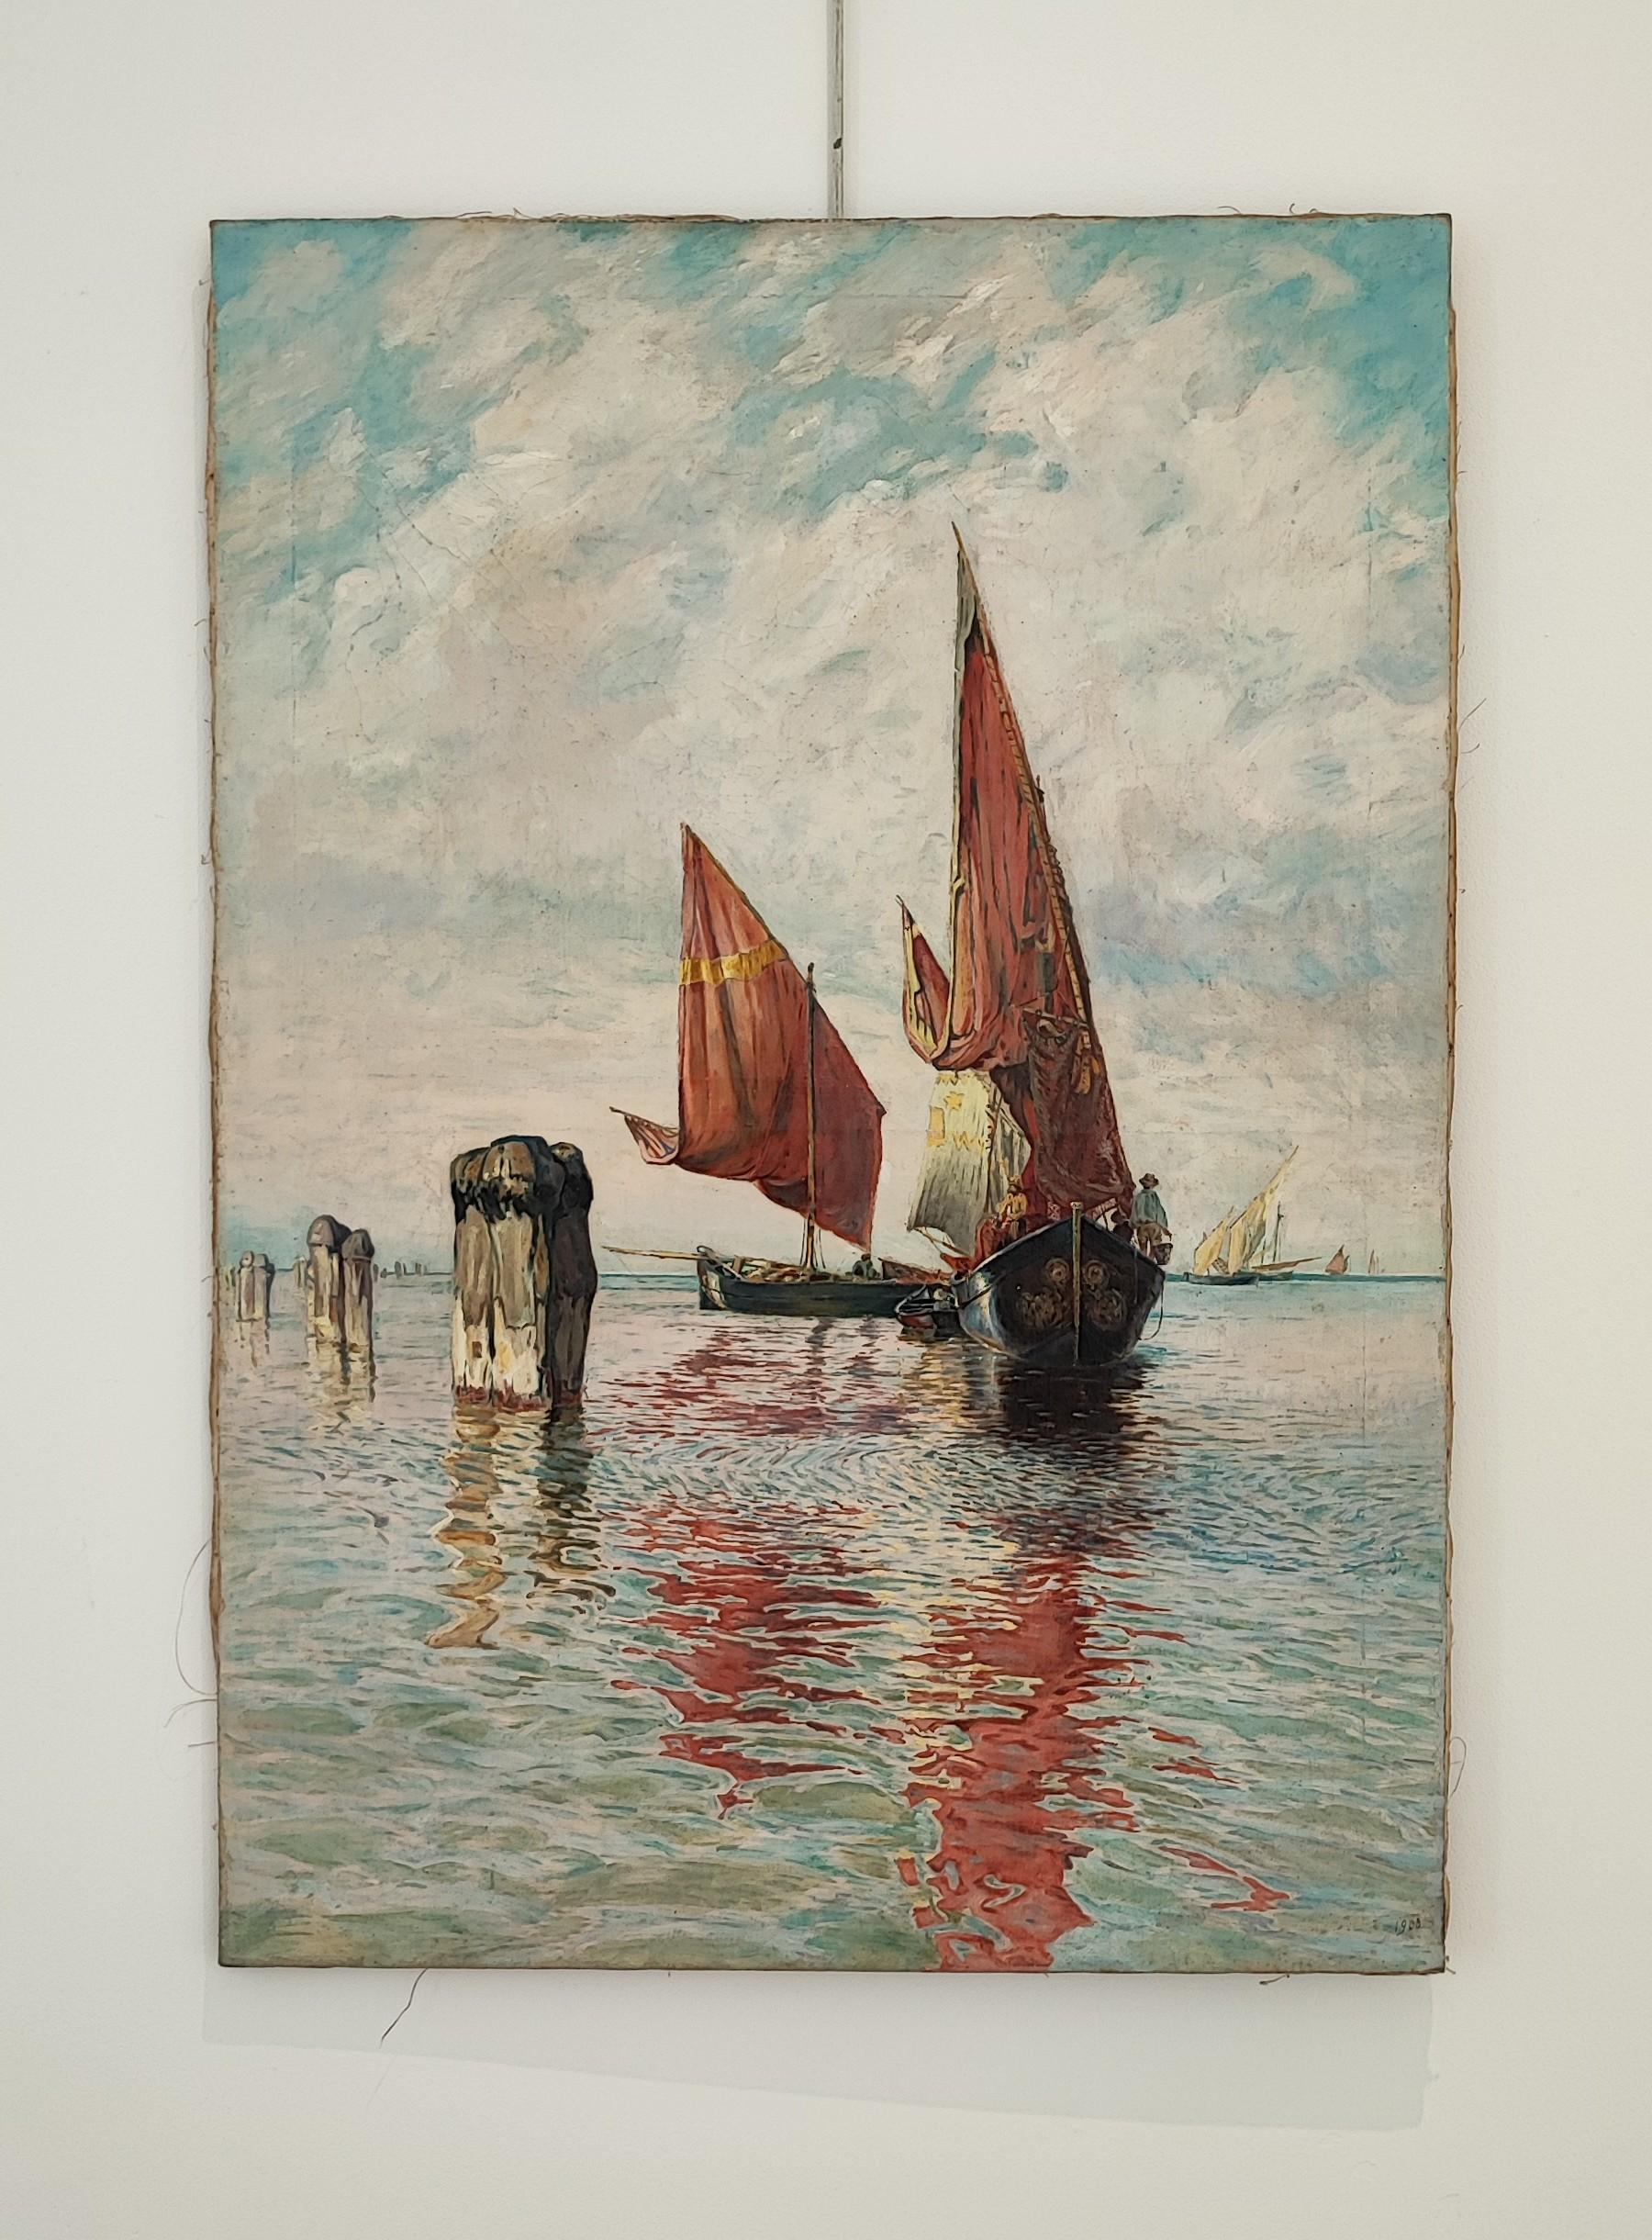 Fishing boats on the lagoon of Venice - Painting by Arthur Calame